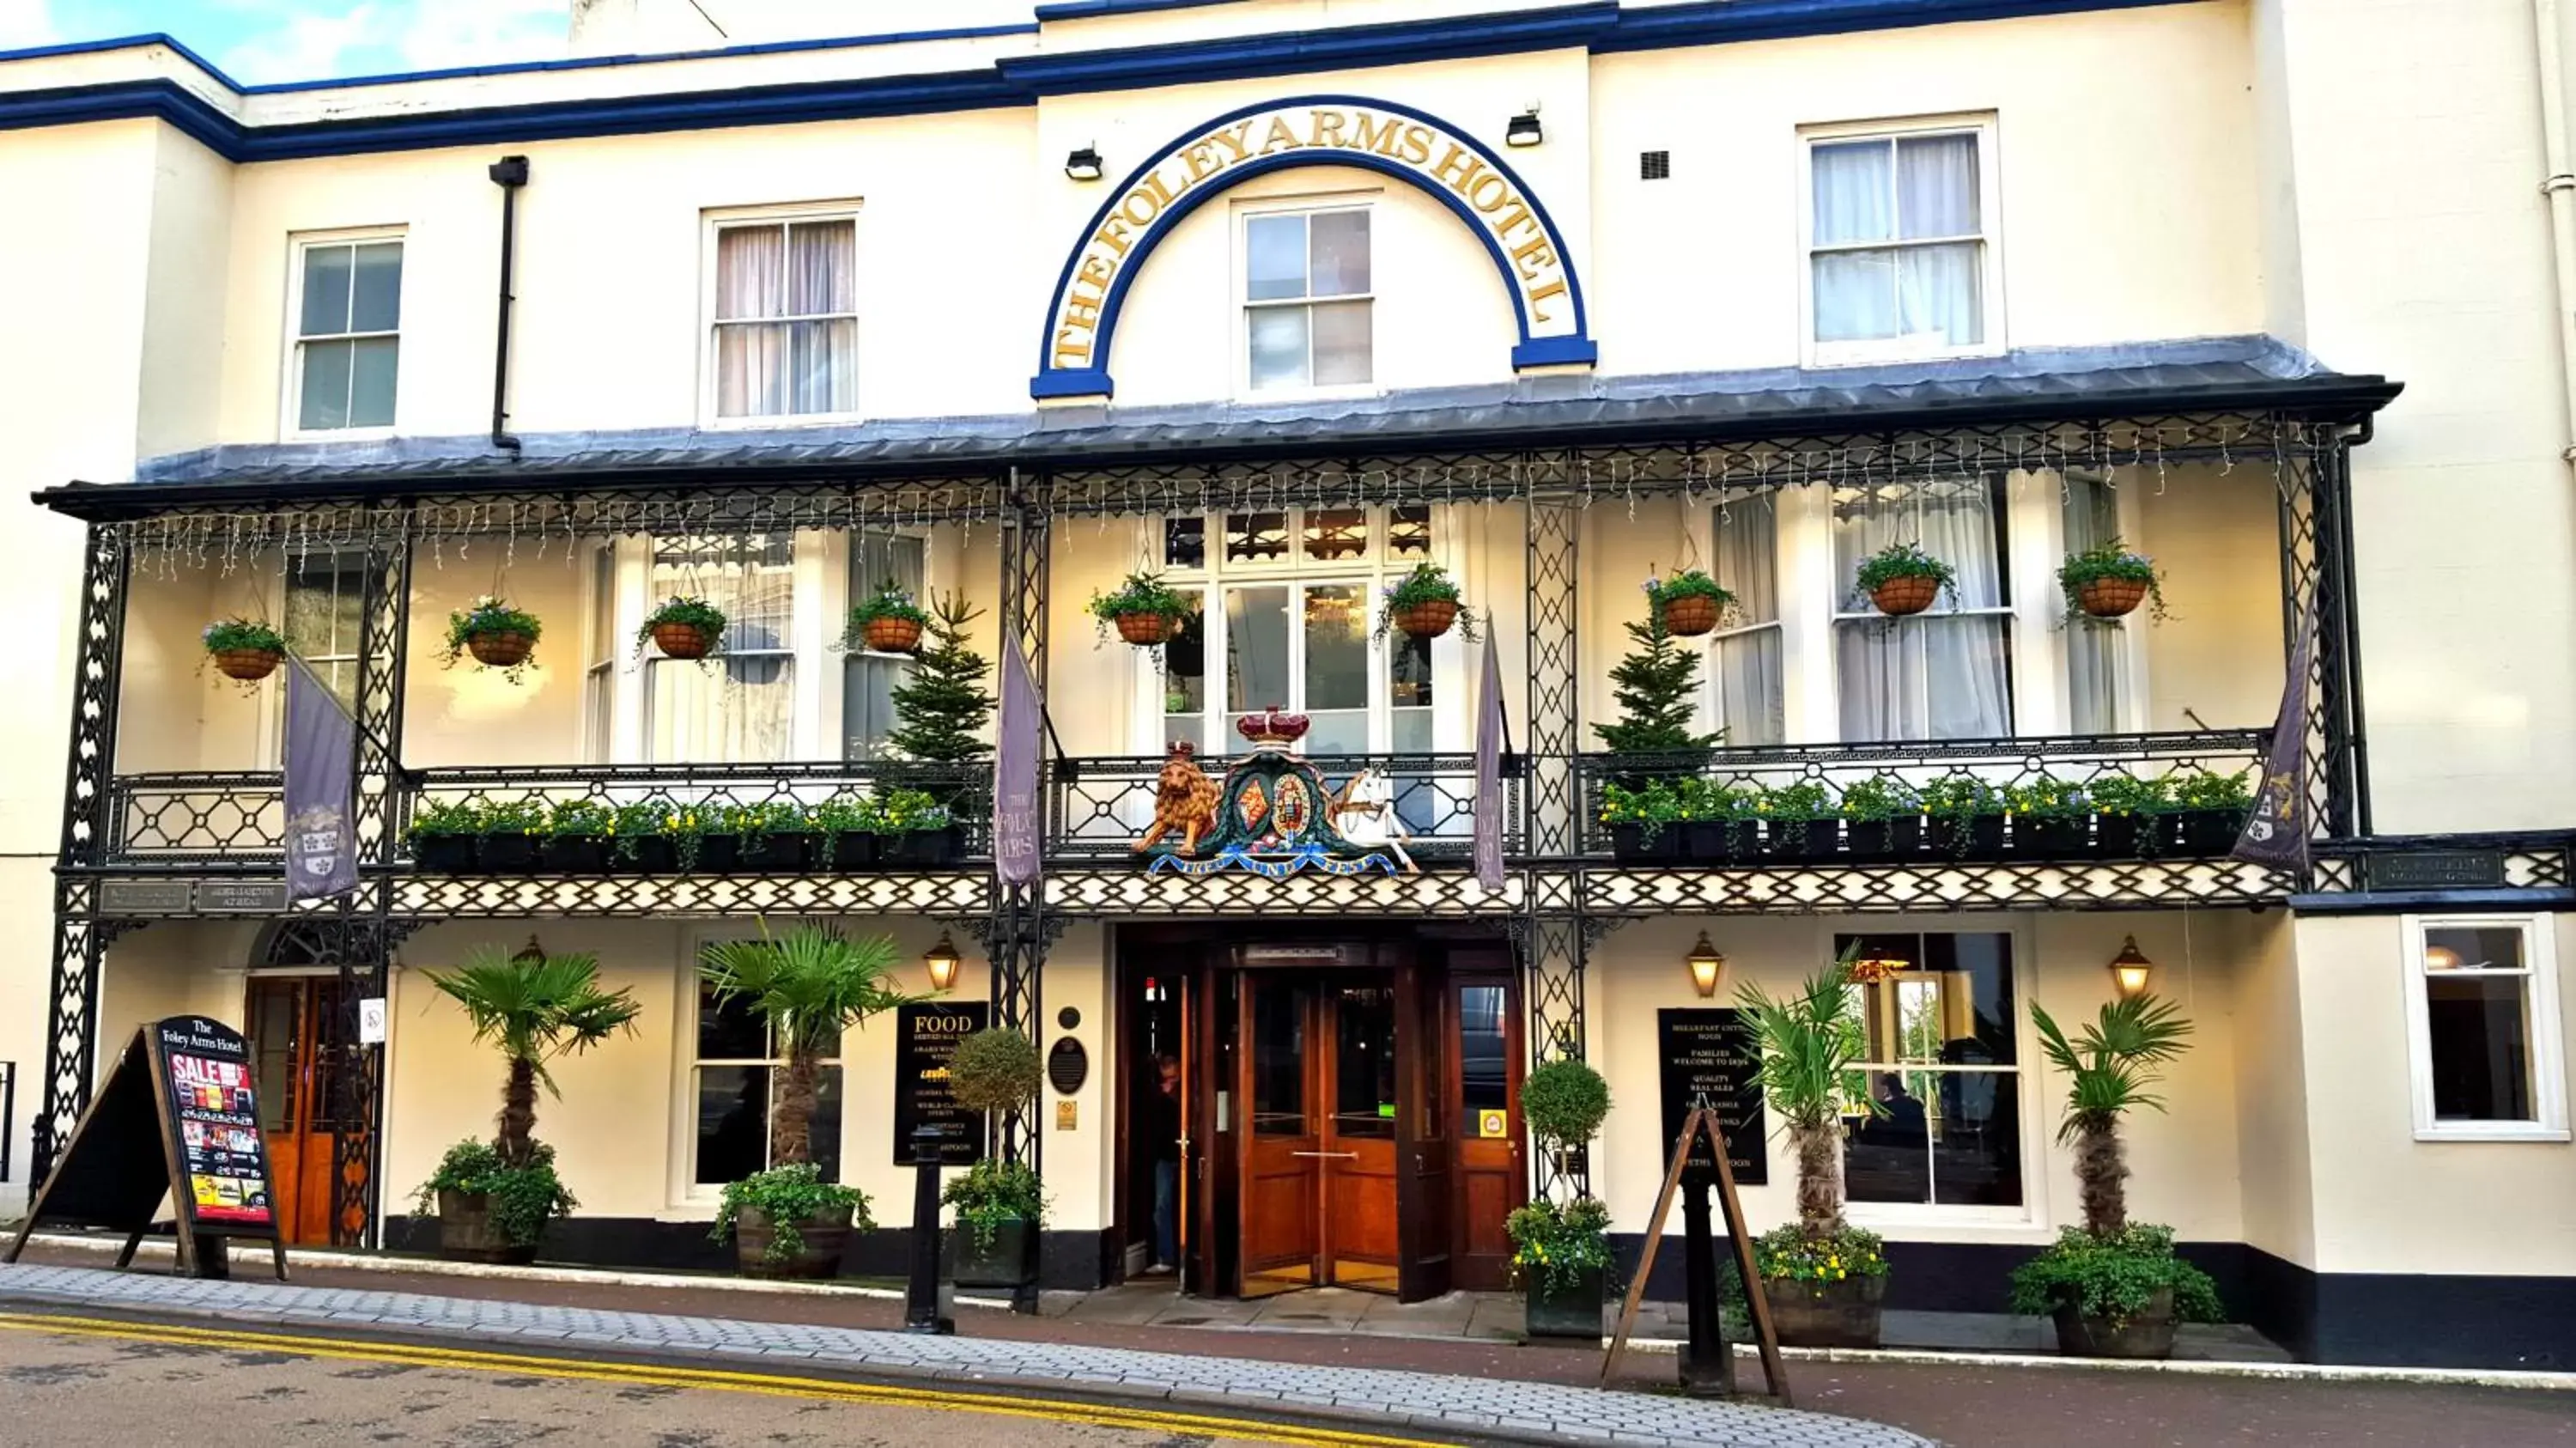 Facade/entrance in The Foley Arms Hotel Wetherspoon